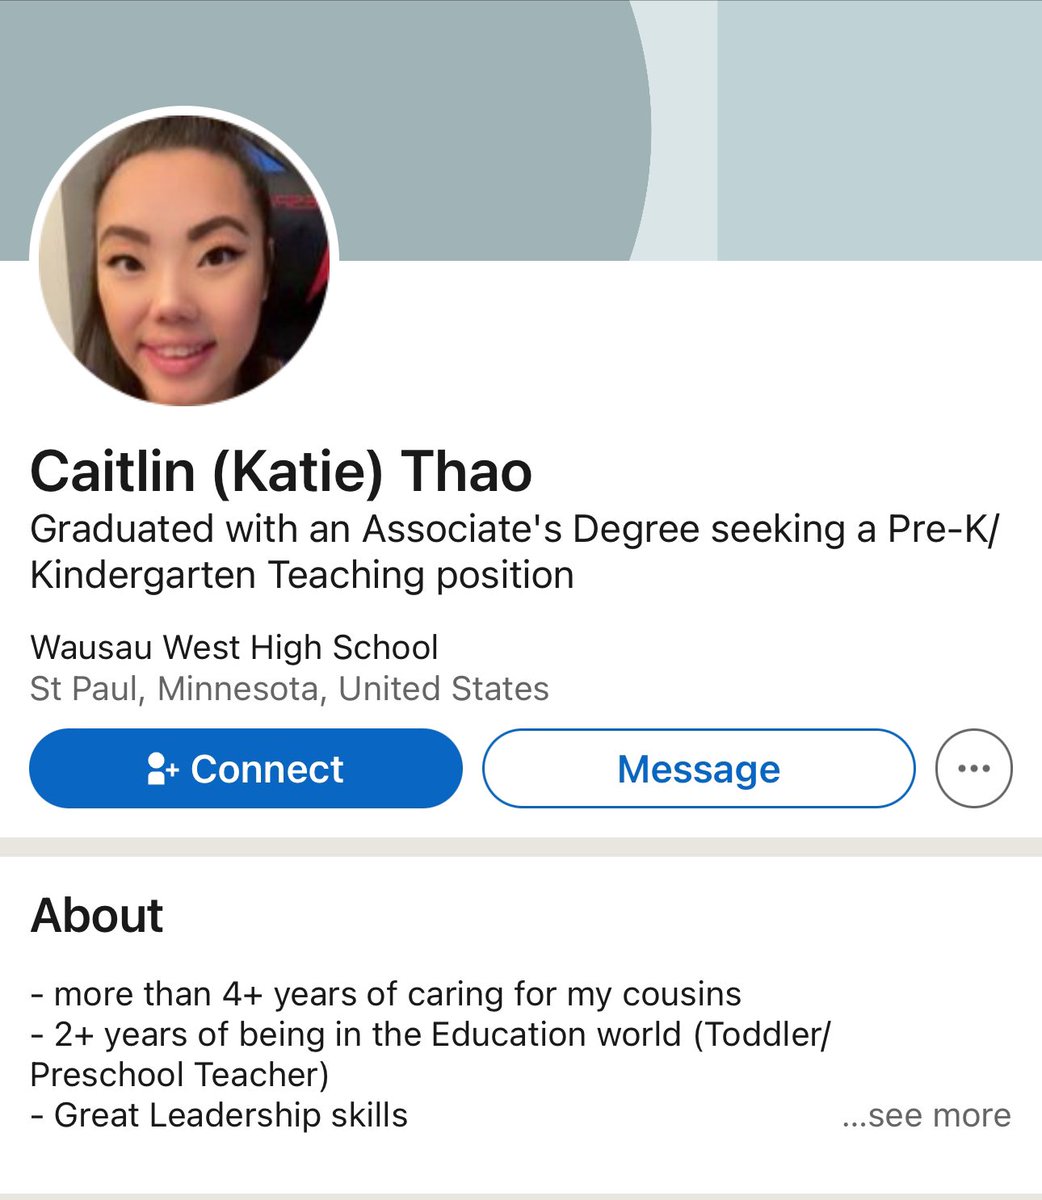 NEW: Female substitute teacher Caitlin Thao is allegedly ‘on the run’ according to the Daily Mail after she was caught r*ping a 17-year-old boy in her classroom. Let’s find this pedo. The incident happened at St Paul City School in Minnesota. A nationwide arrest warrant was…